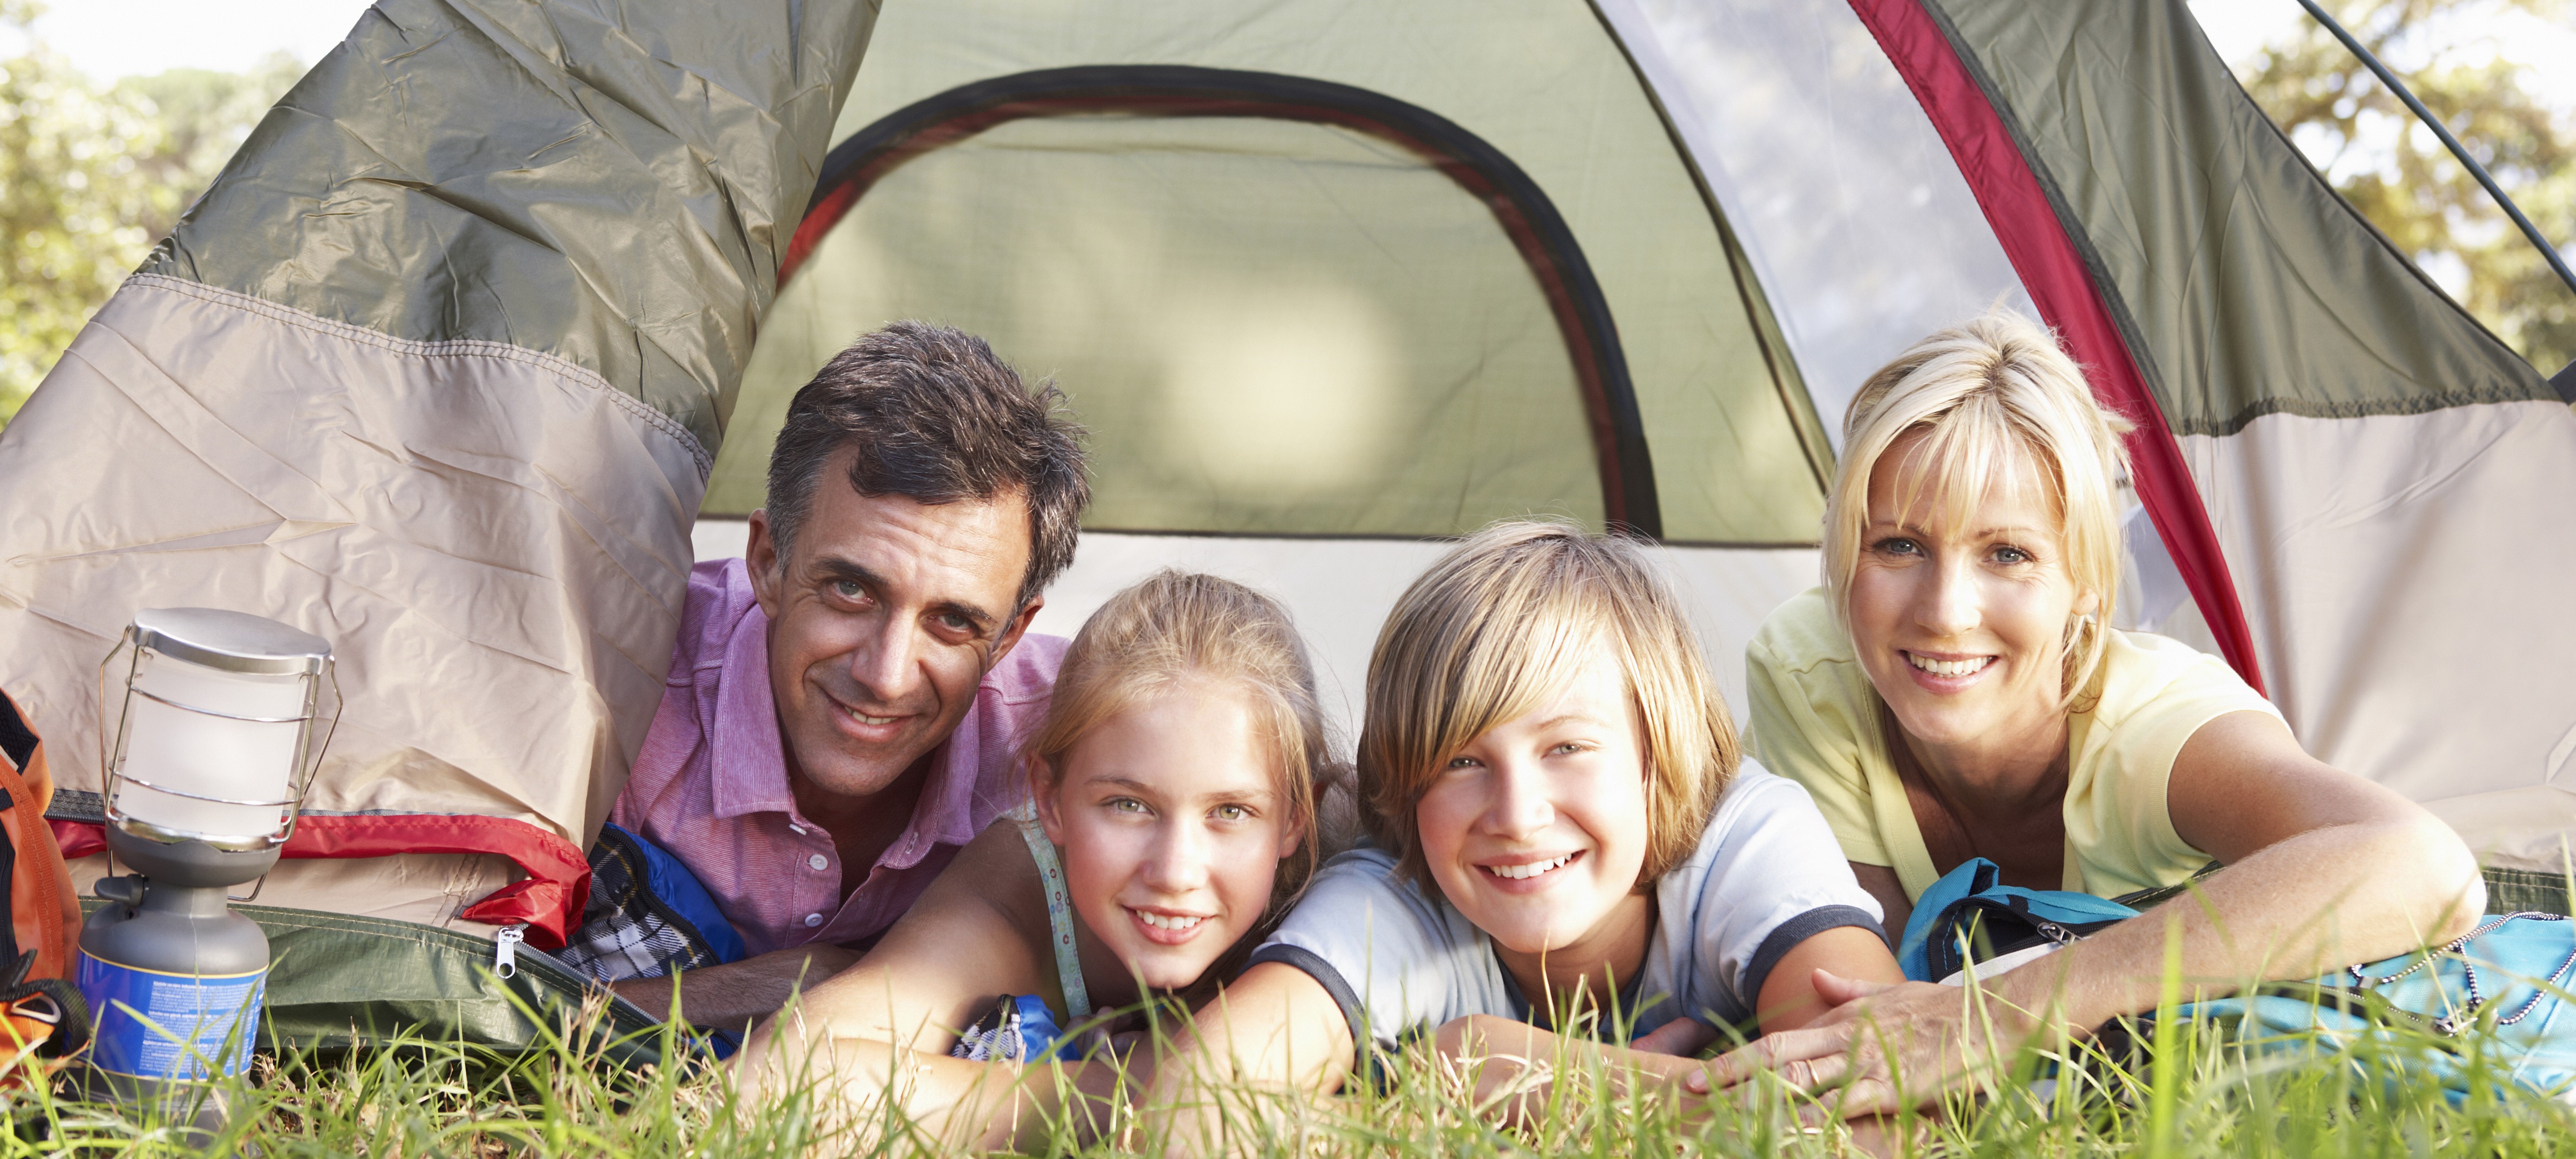 How to look after your back while camping Torbay Chiropractic